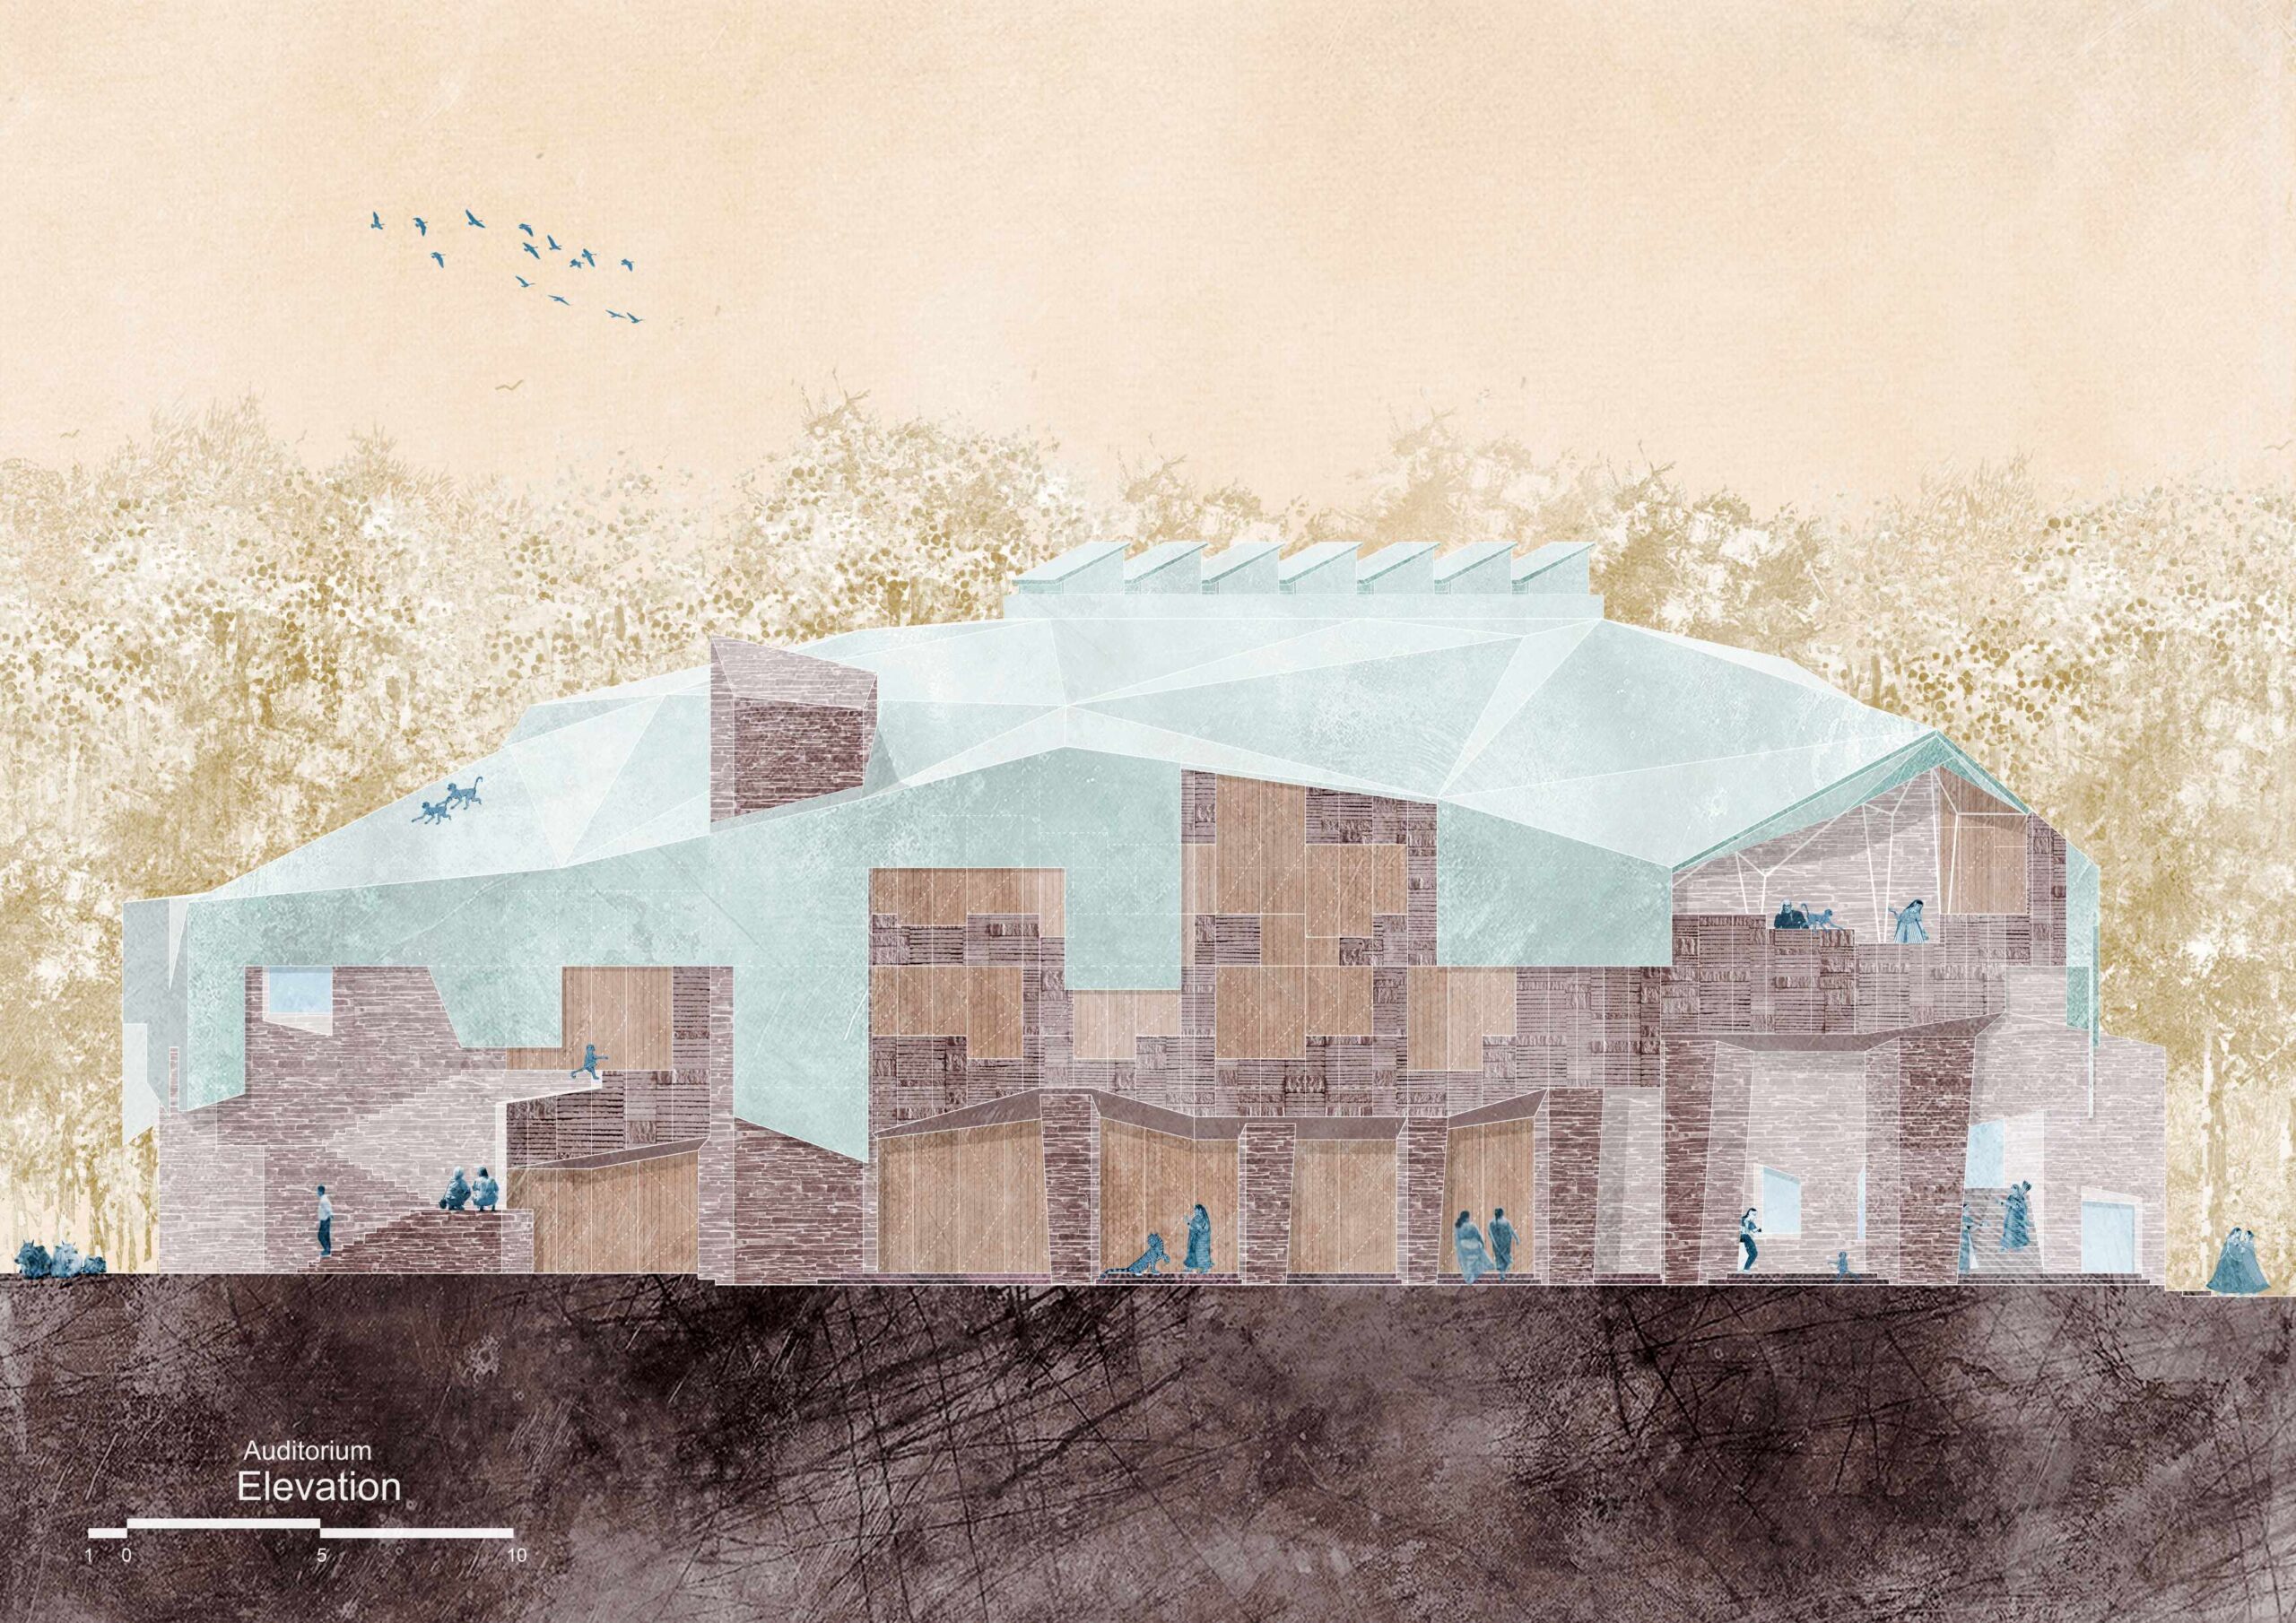 Centre of Excellence, Bengaluru, Competition Entry by Shilpa Mevada + Hundredhands | Council of Architecture, India 13